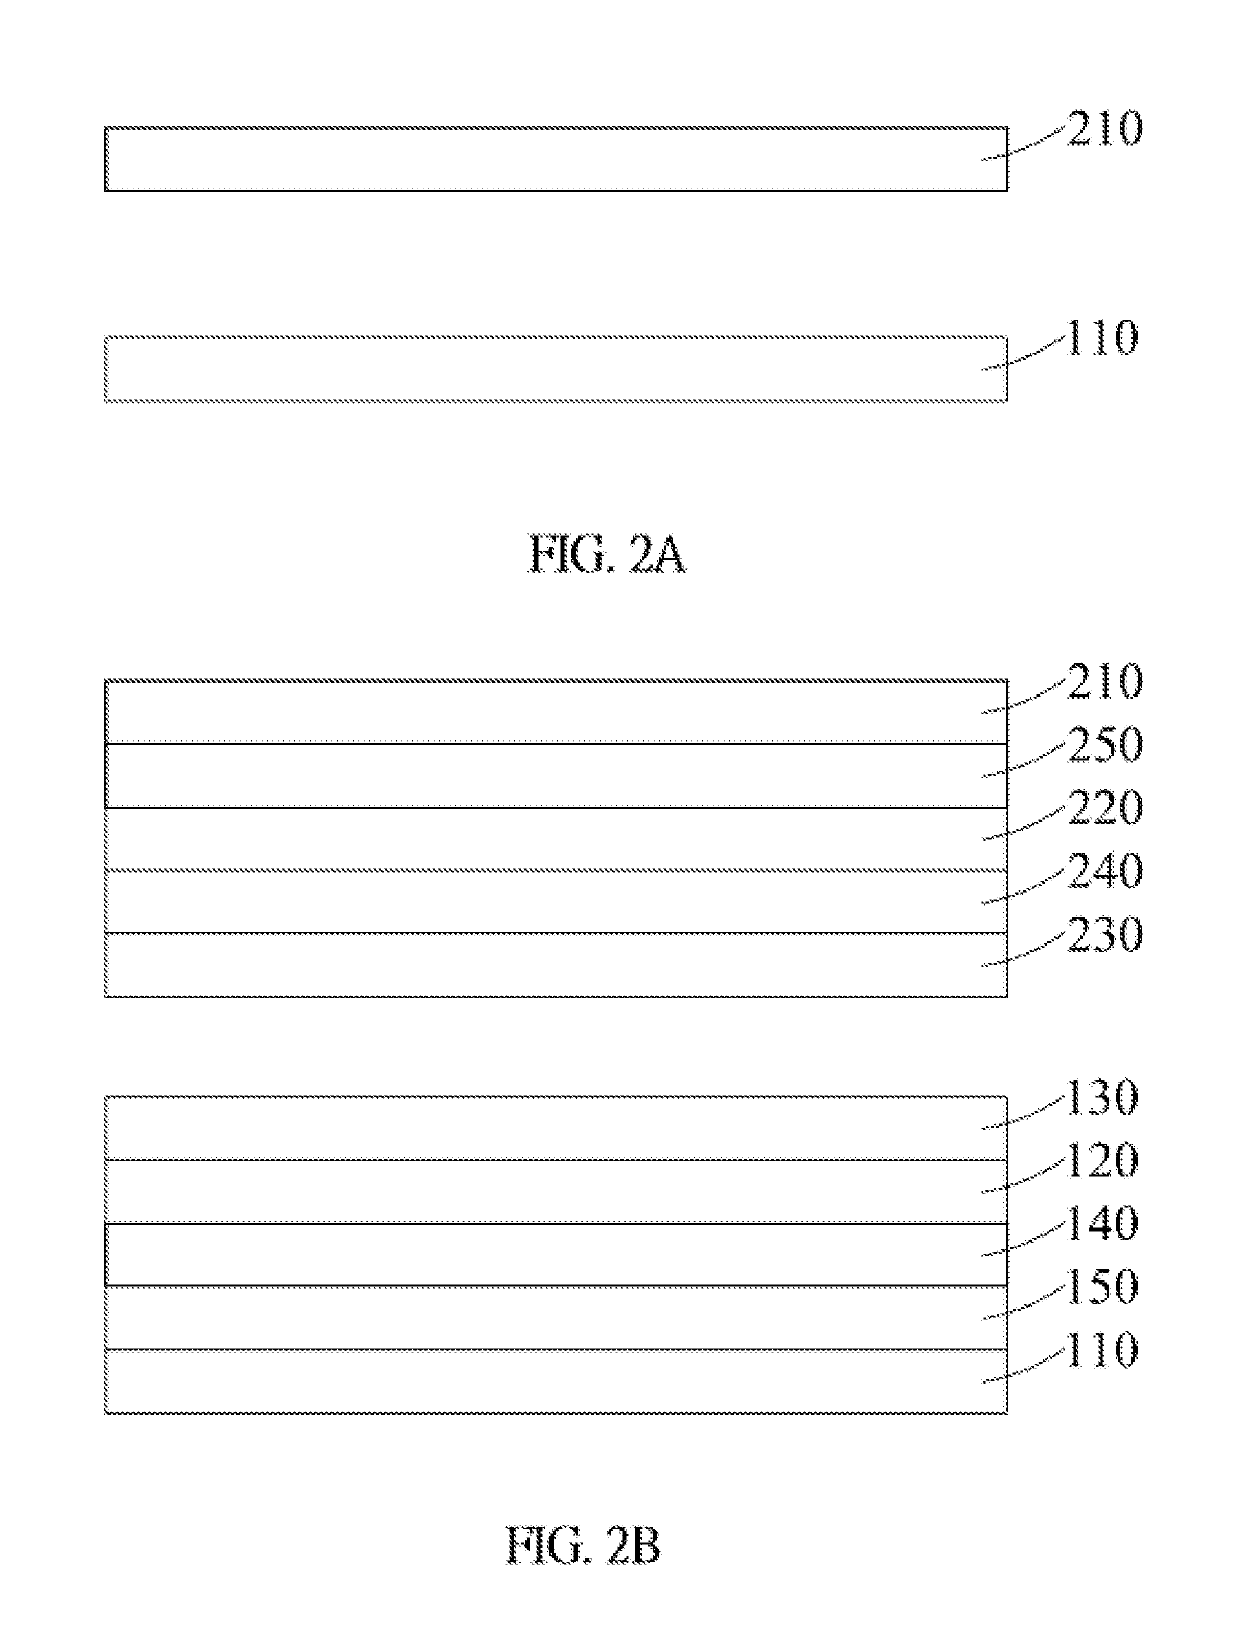 Organic electroluminescent display device and method for manufacturing thereof